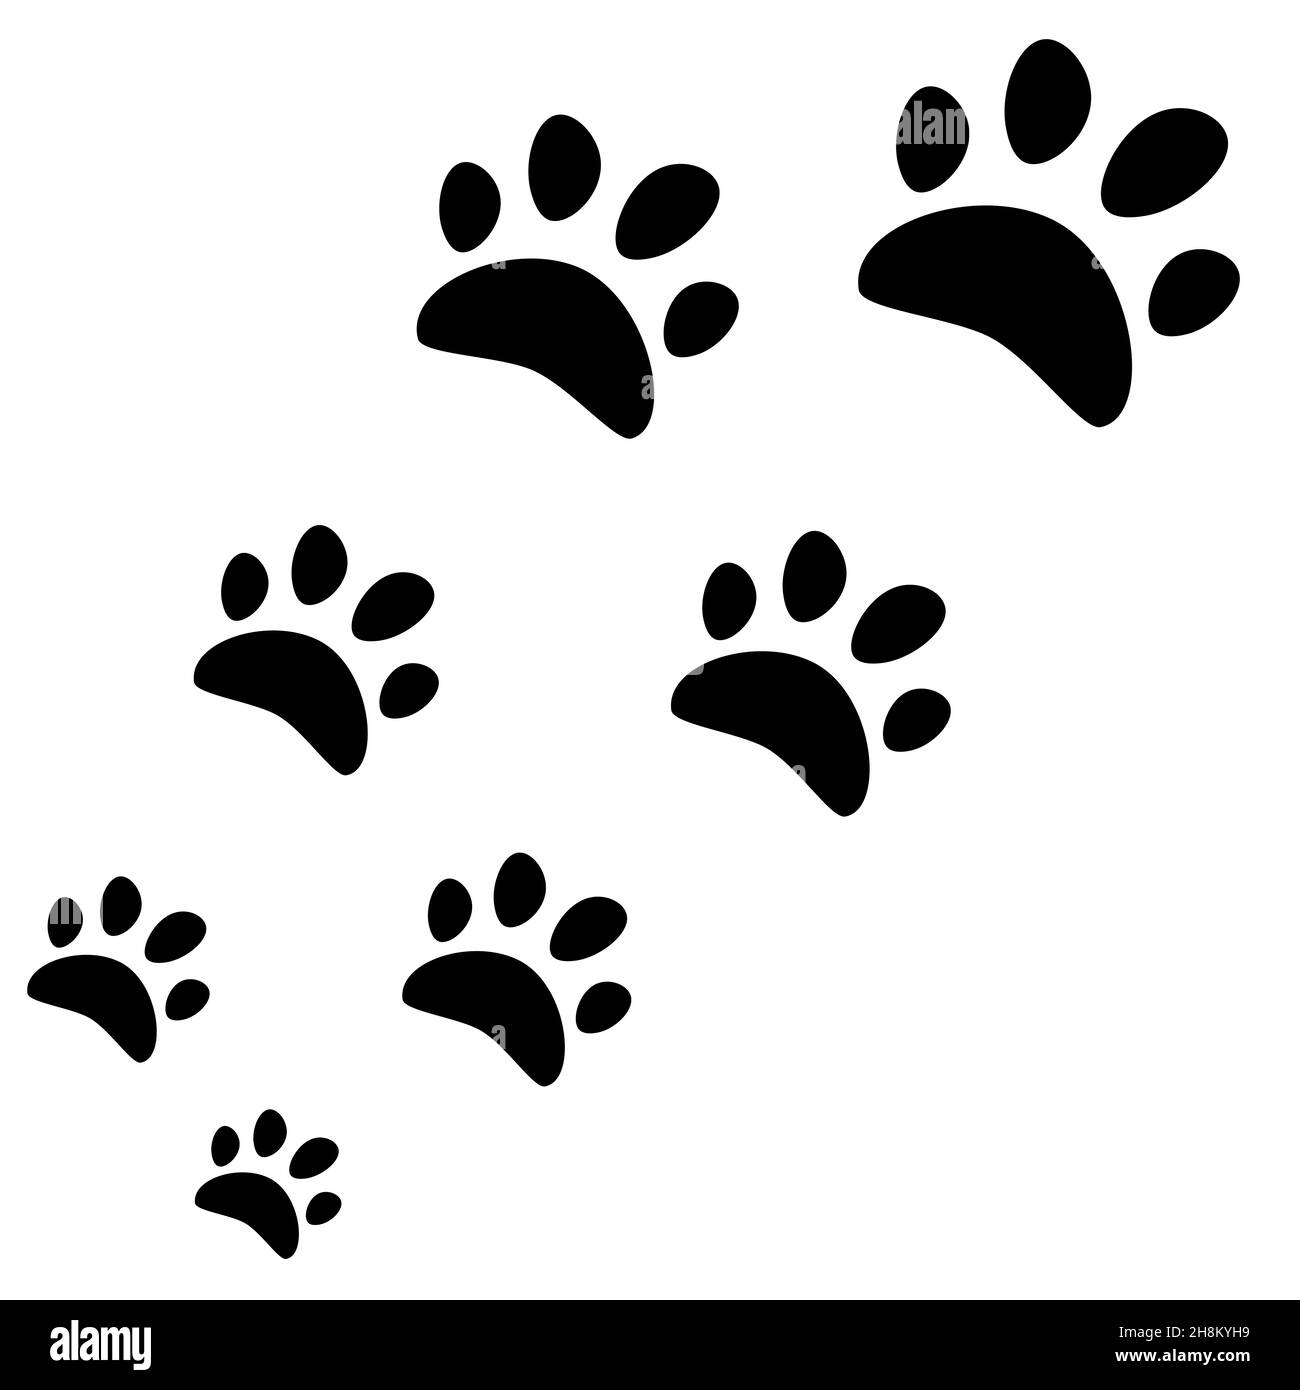 Cat tracks with shadow, vector icon isolated on white background Stock Vector